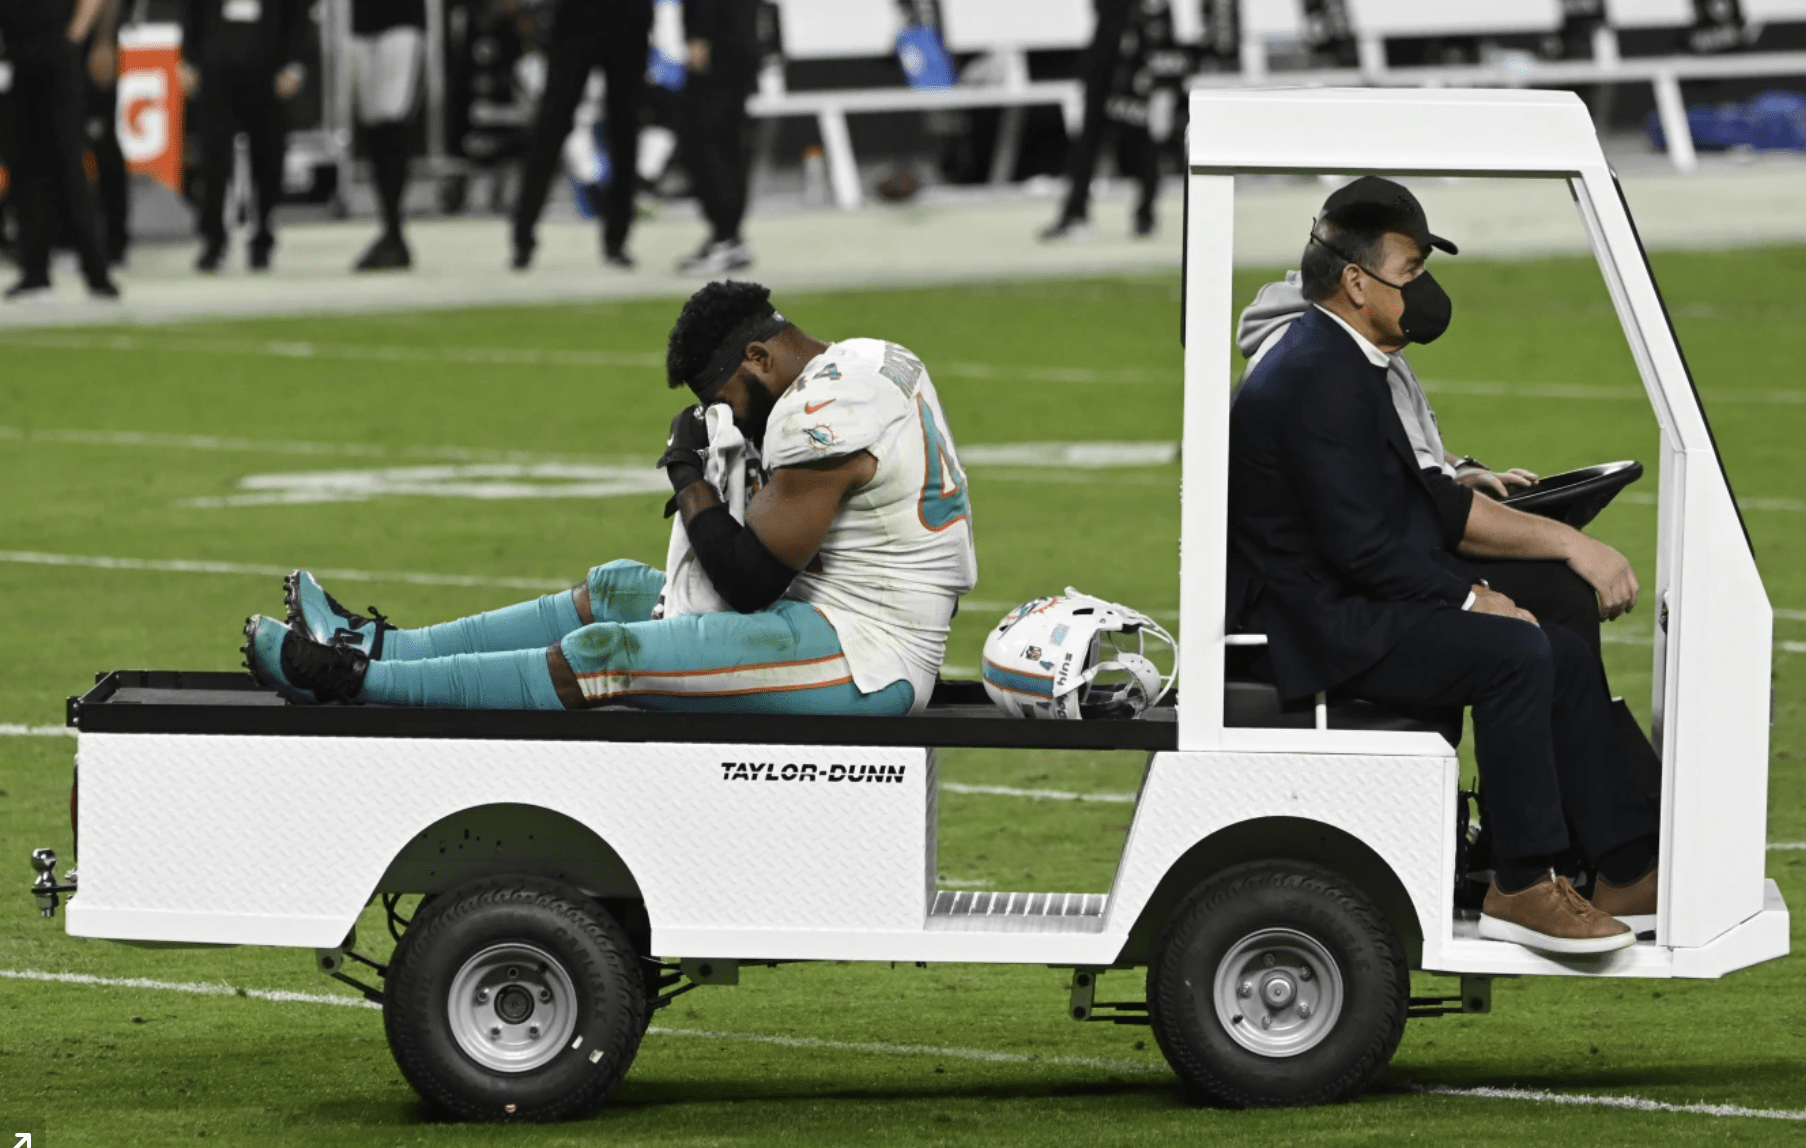 Miami Dolphins outside linebacker Elandon Roberts (44) is driven off the field after an injury against the Las Vegas Raiders during the second half of an NFL football game, Saturday, Dec. 26, 2020, in Las Vegas. Hamstring pulls, ligament tears and ankle sprains can be as formidable an opponent for NFL teams as a high-scoring offense or stingy defense.